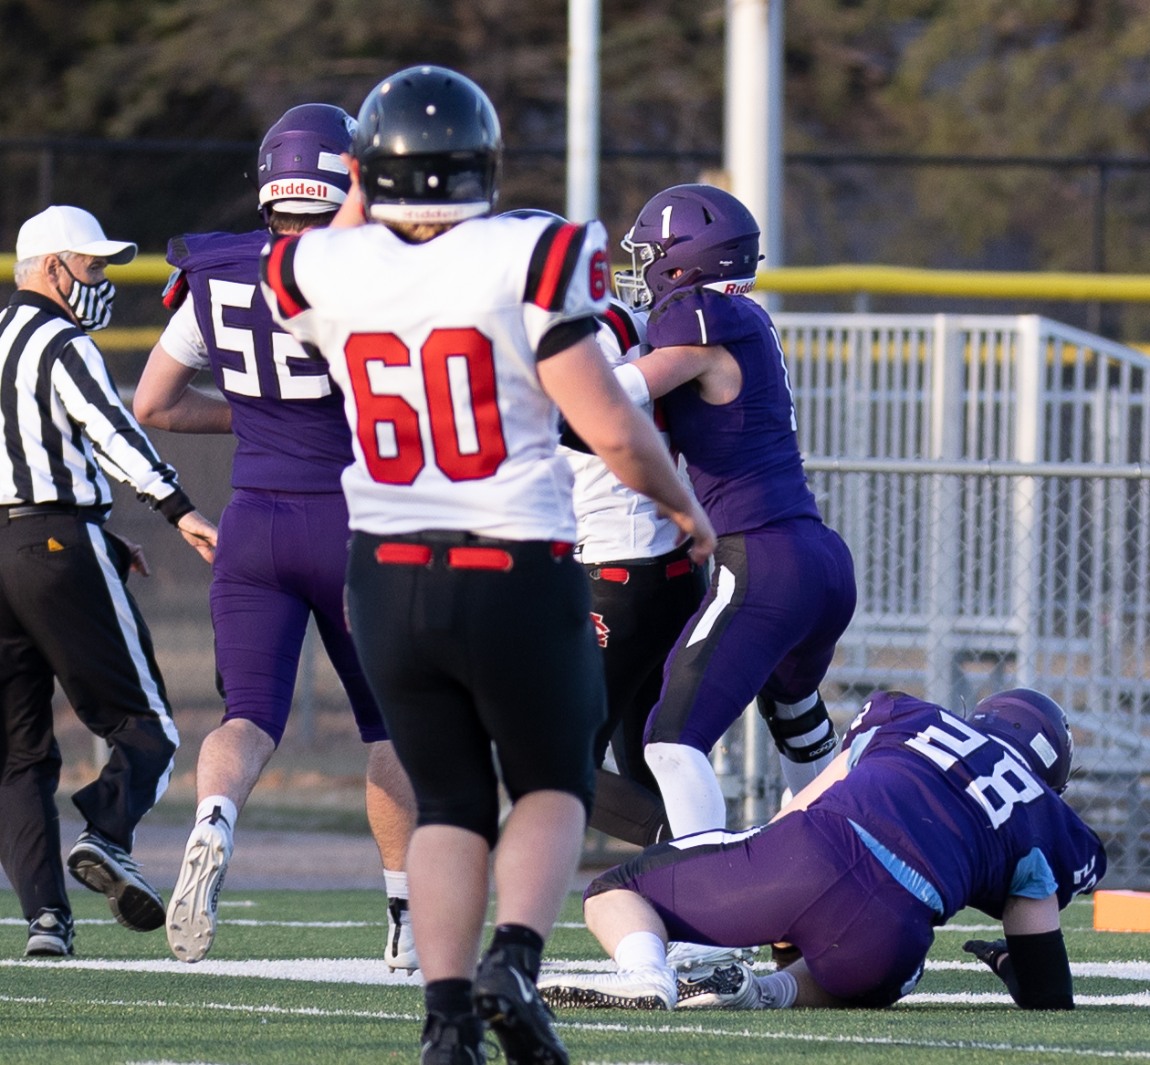 Eau-Claire-Memorial-JV-Football-LaCrosse-Central-at-Home-3-29-21-1264